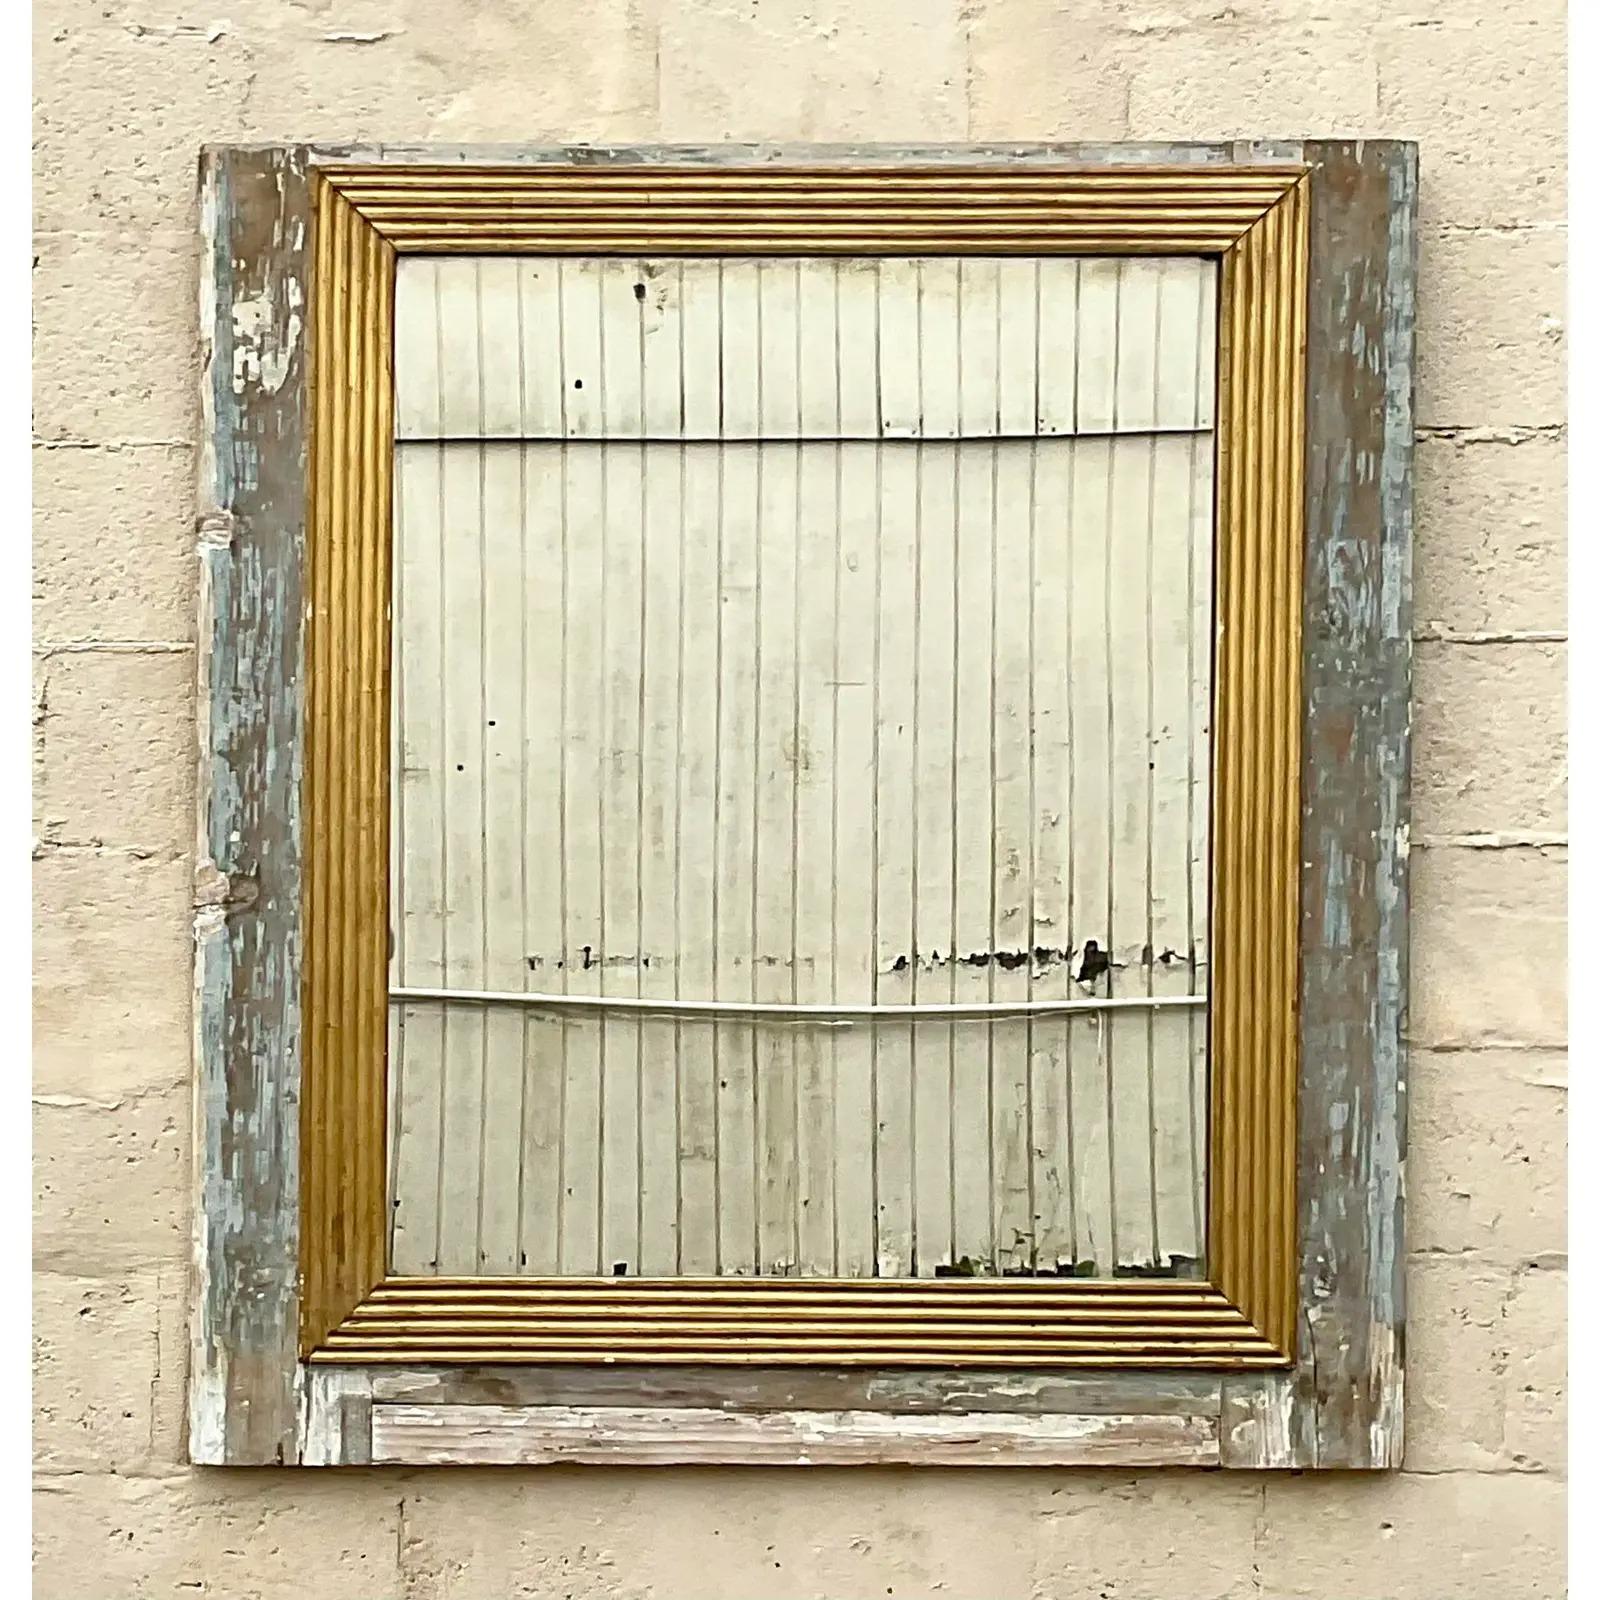 A fantastic vintage Boho wall mirror. One of the most beautiful mirrors I have ever seem. A chic combo of distressed wood and inset carved gilt strips. Acquired from a Palm Beach estate.